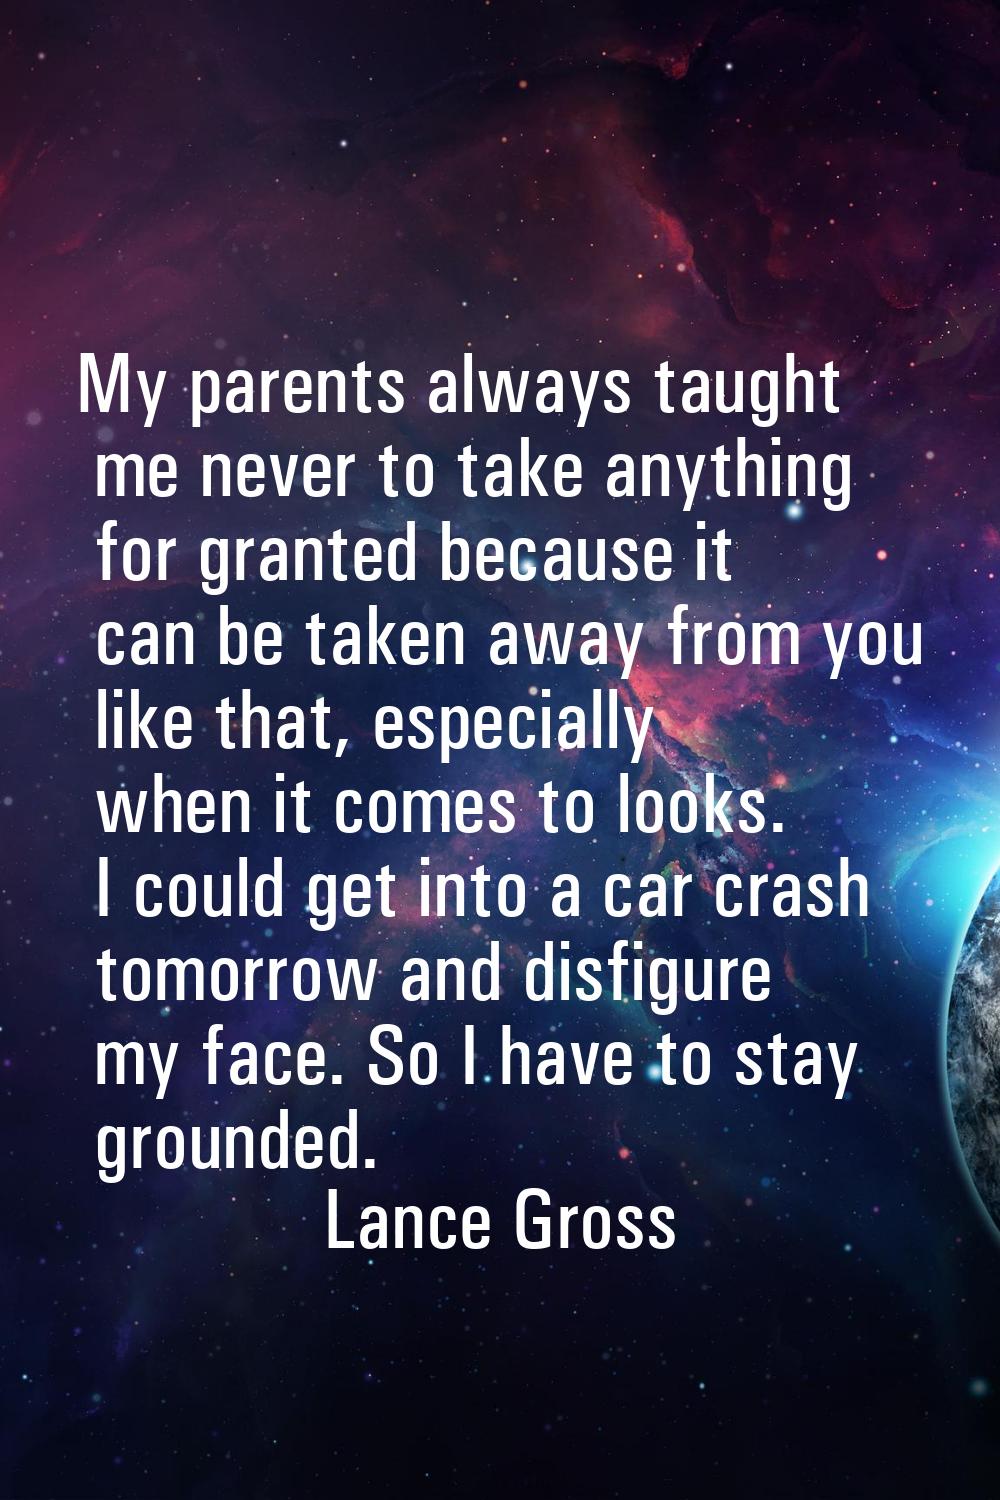 My parents always taught me never to take anything for granted because it can be taken away from yo